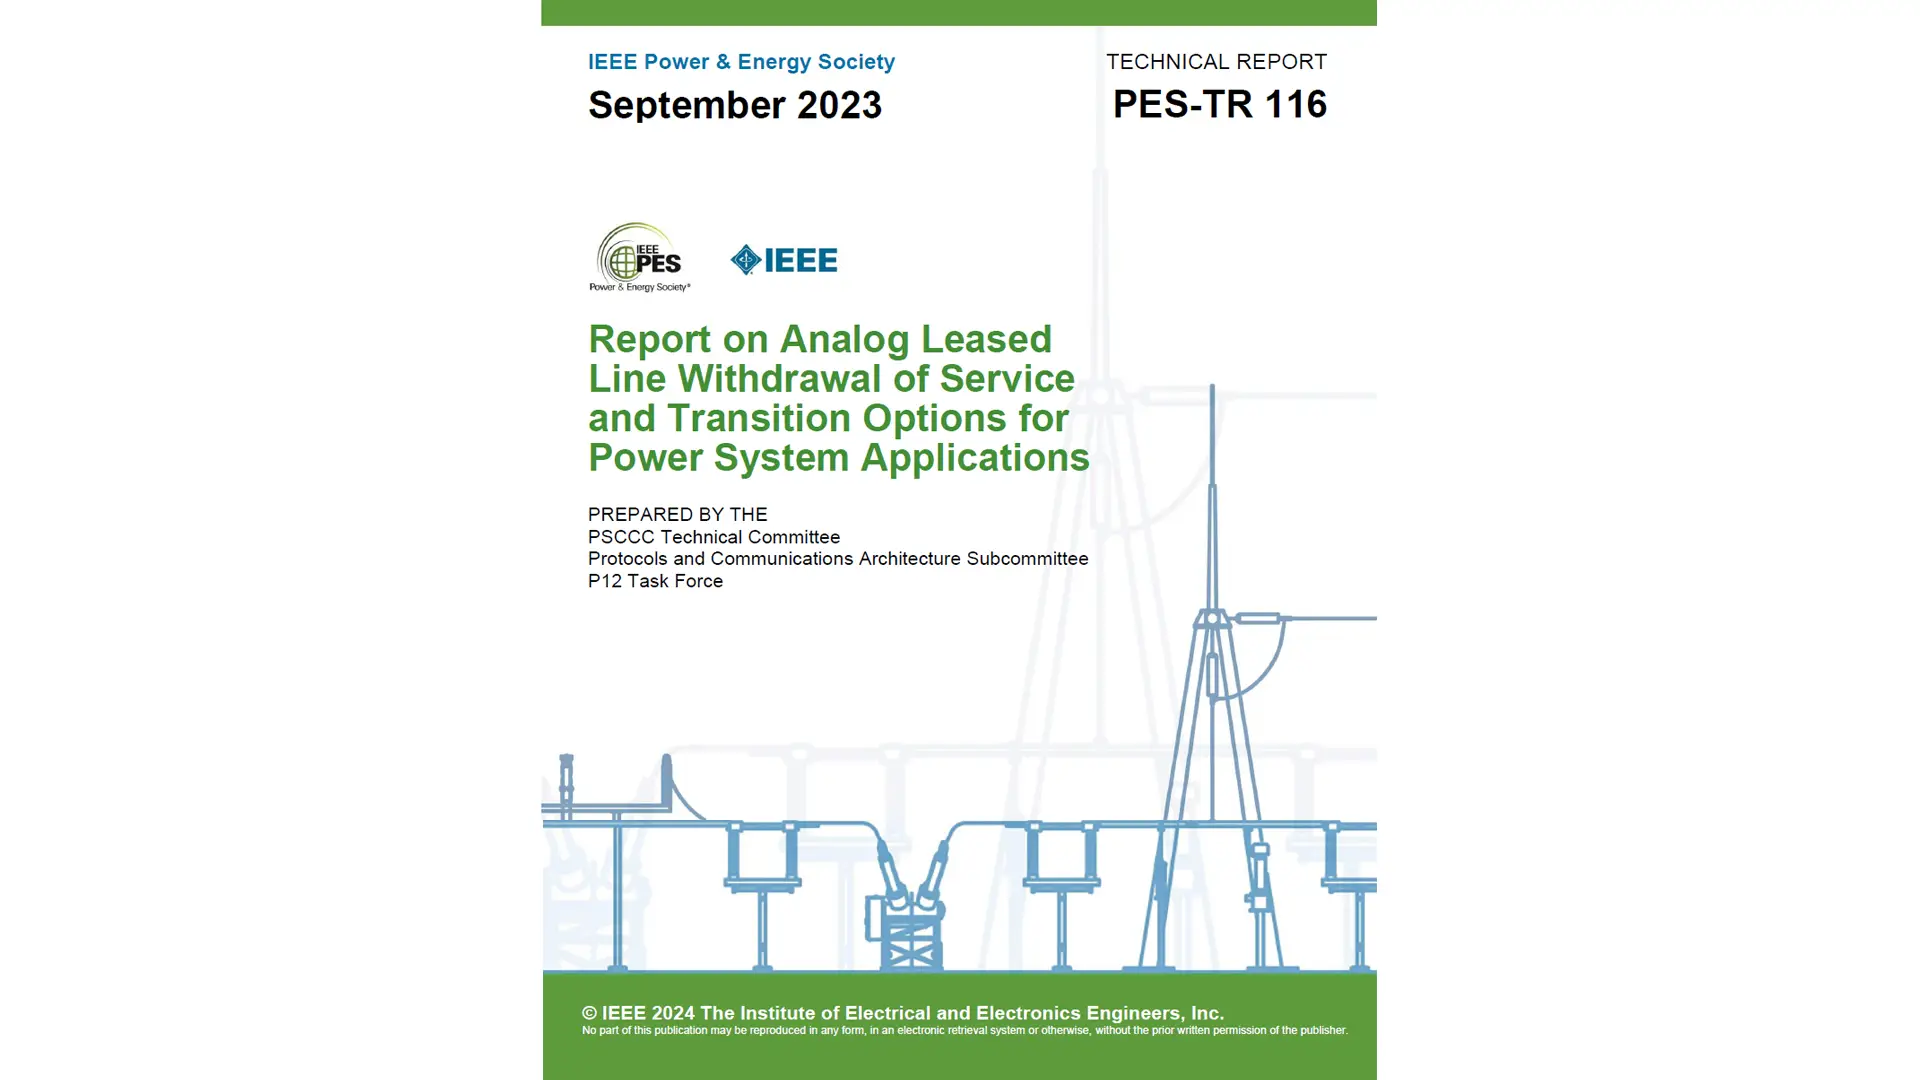 Report on Analog Leased Line Withdrawal of Service and Transition Options for Power System Applications (TR 116)